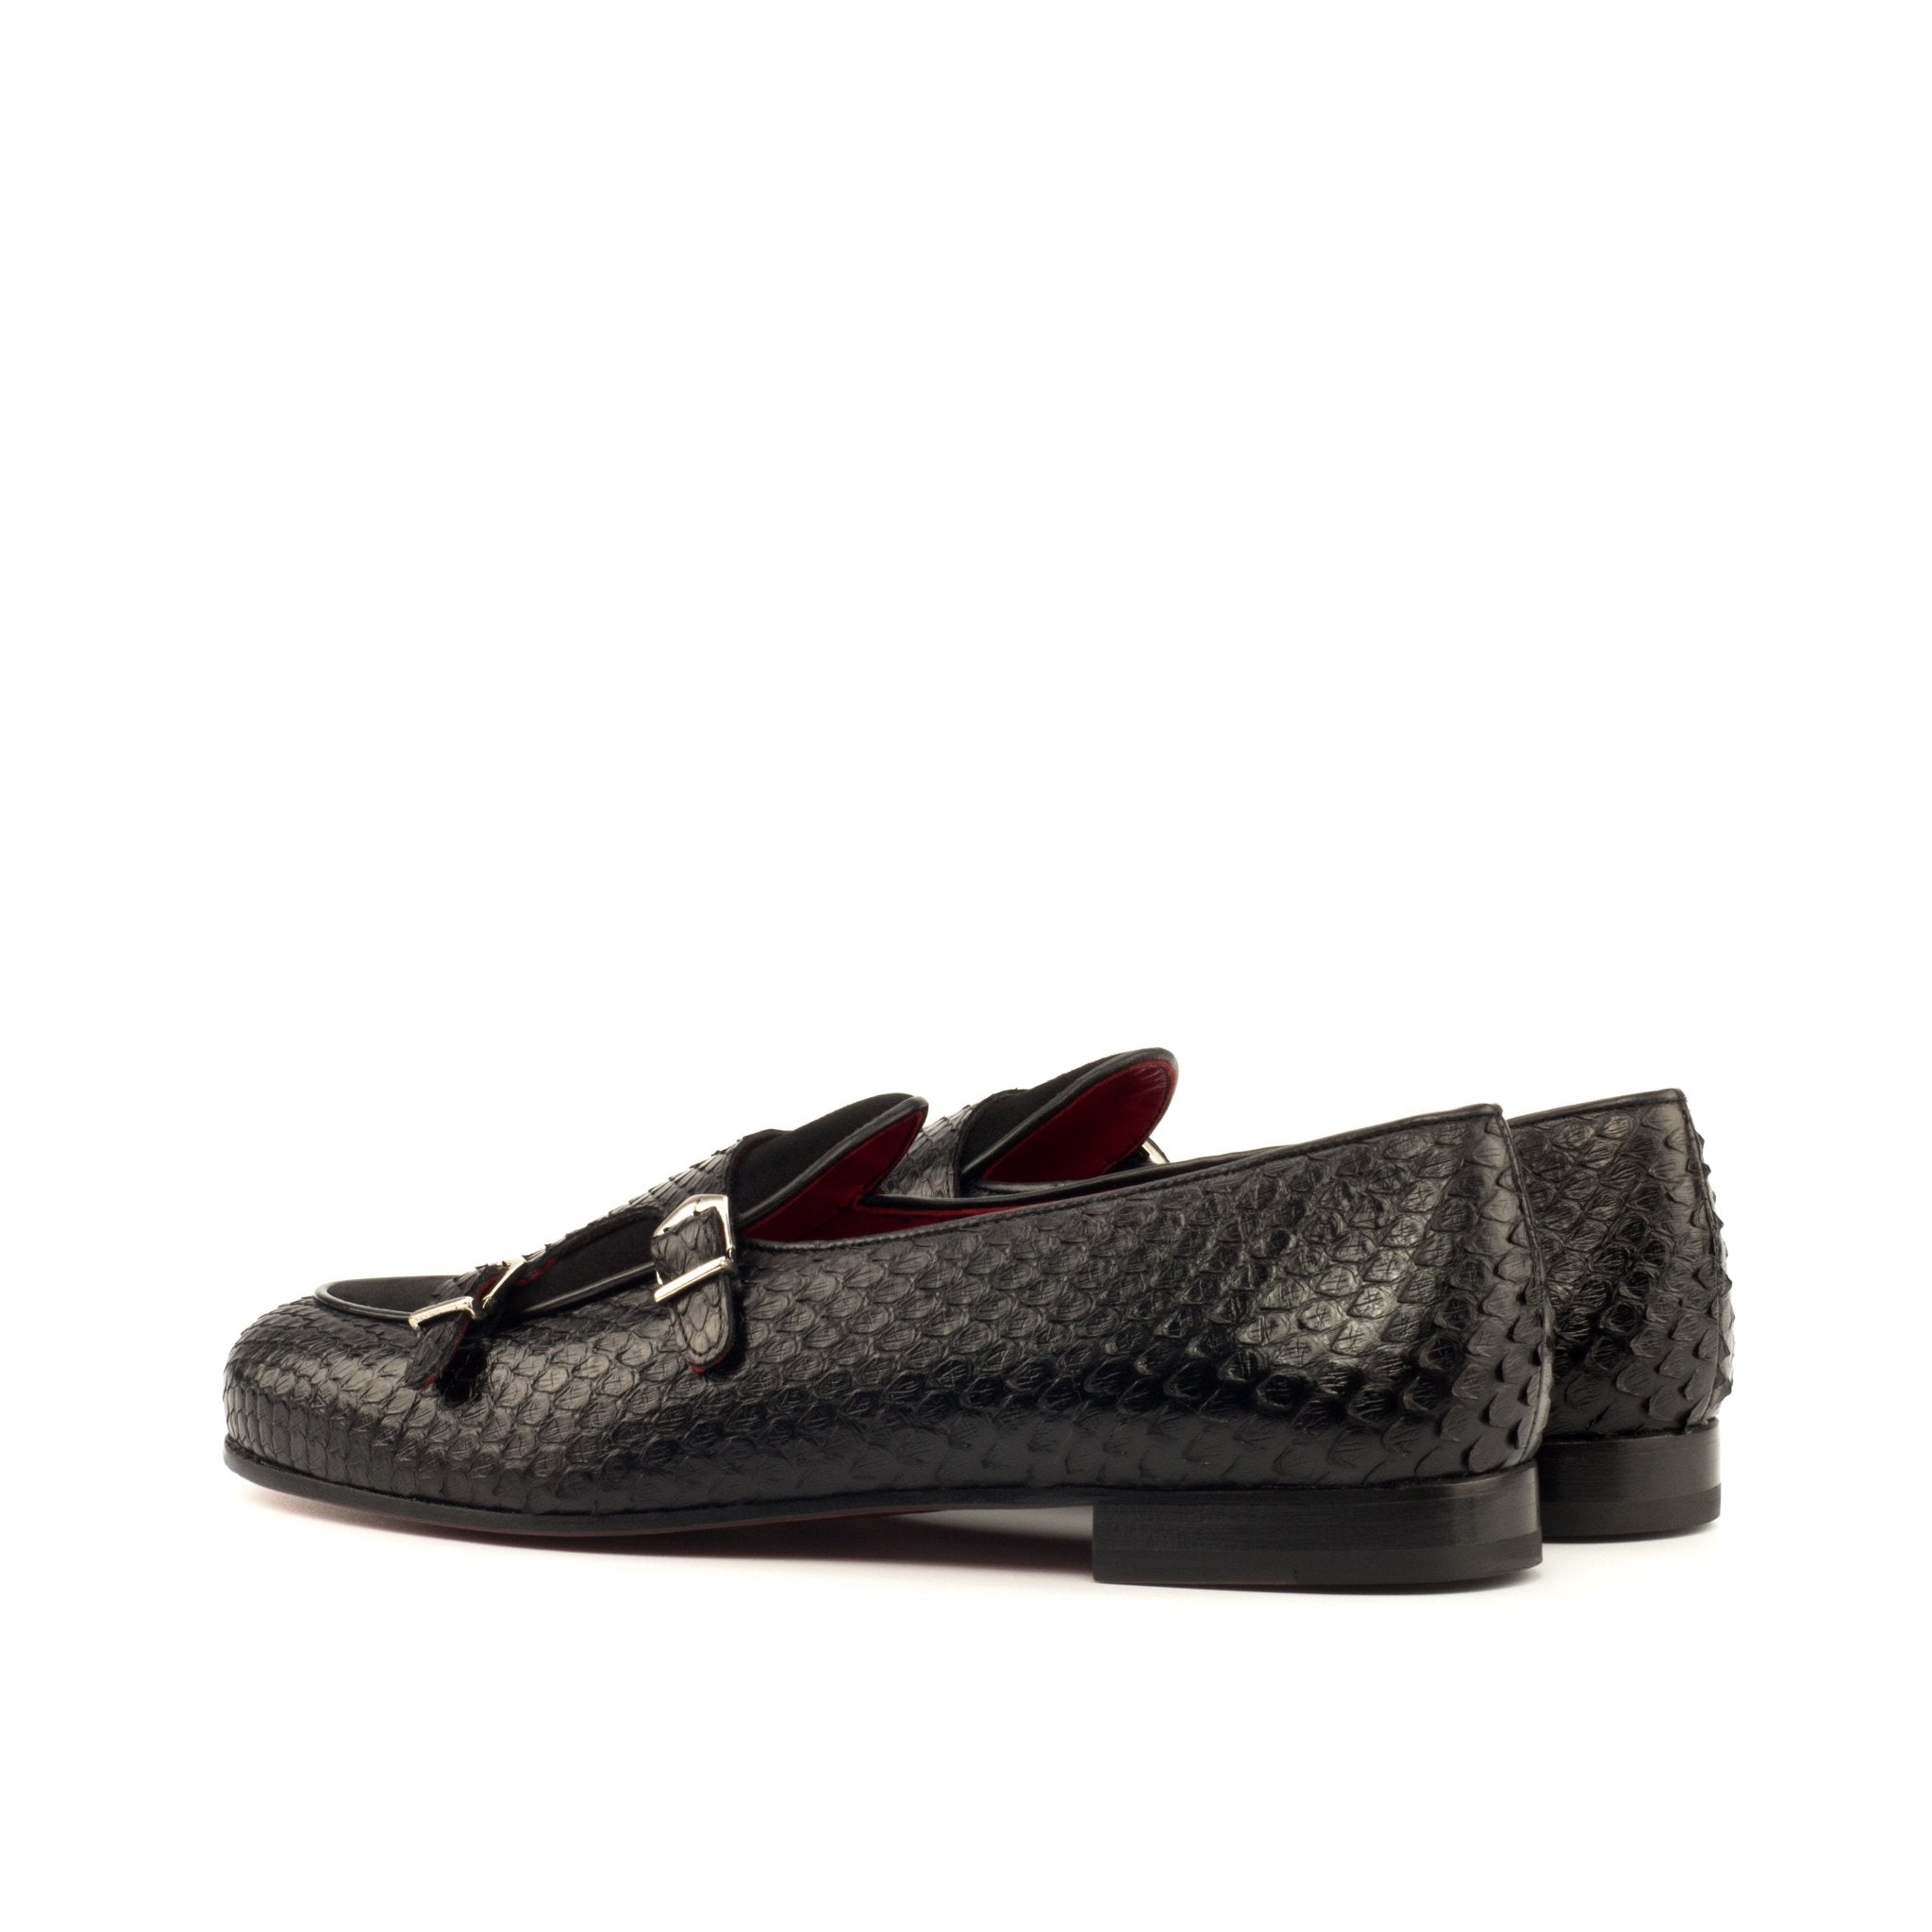 Men's Hendrix Monk Slipper in Black Python and Suede with Red Sole - Maison de Kingsley Couture Harmonie et Fureur Spain